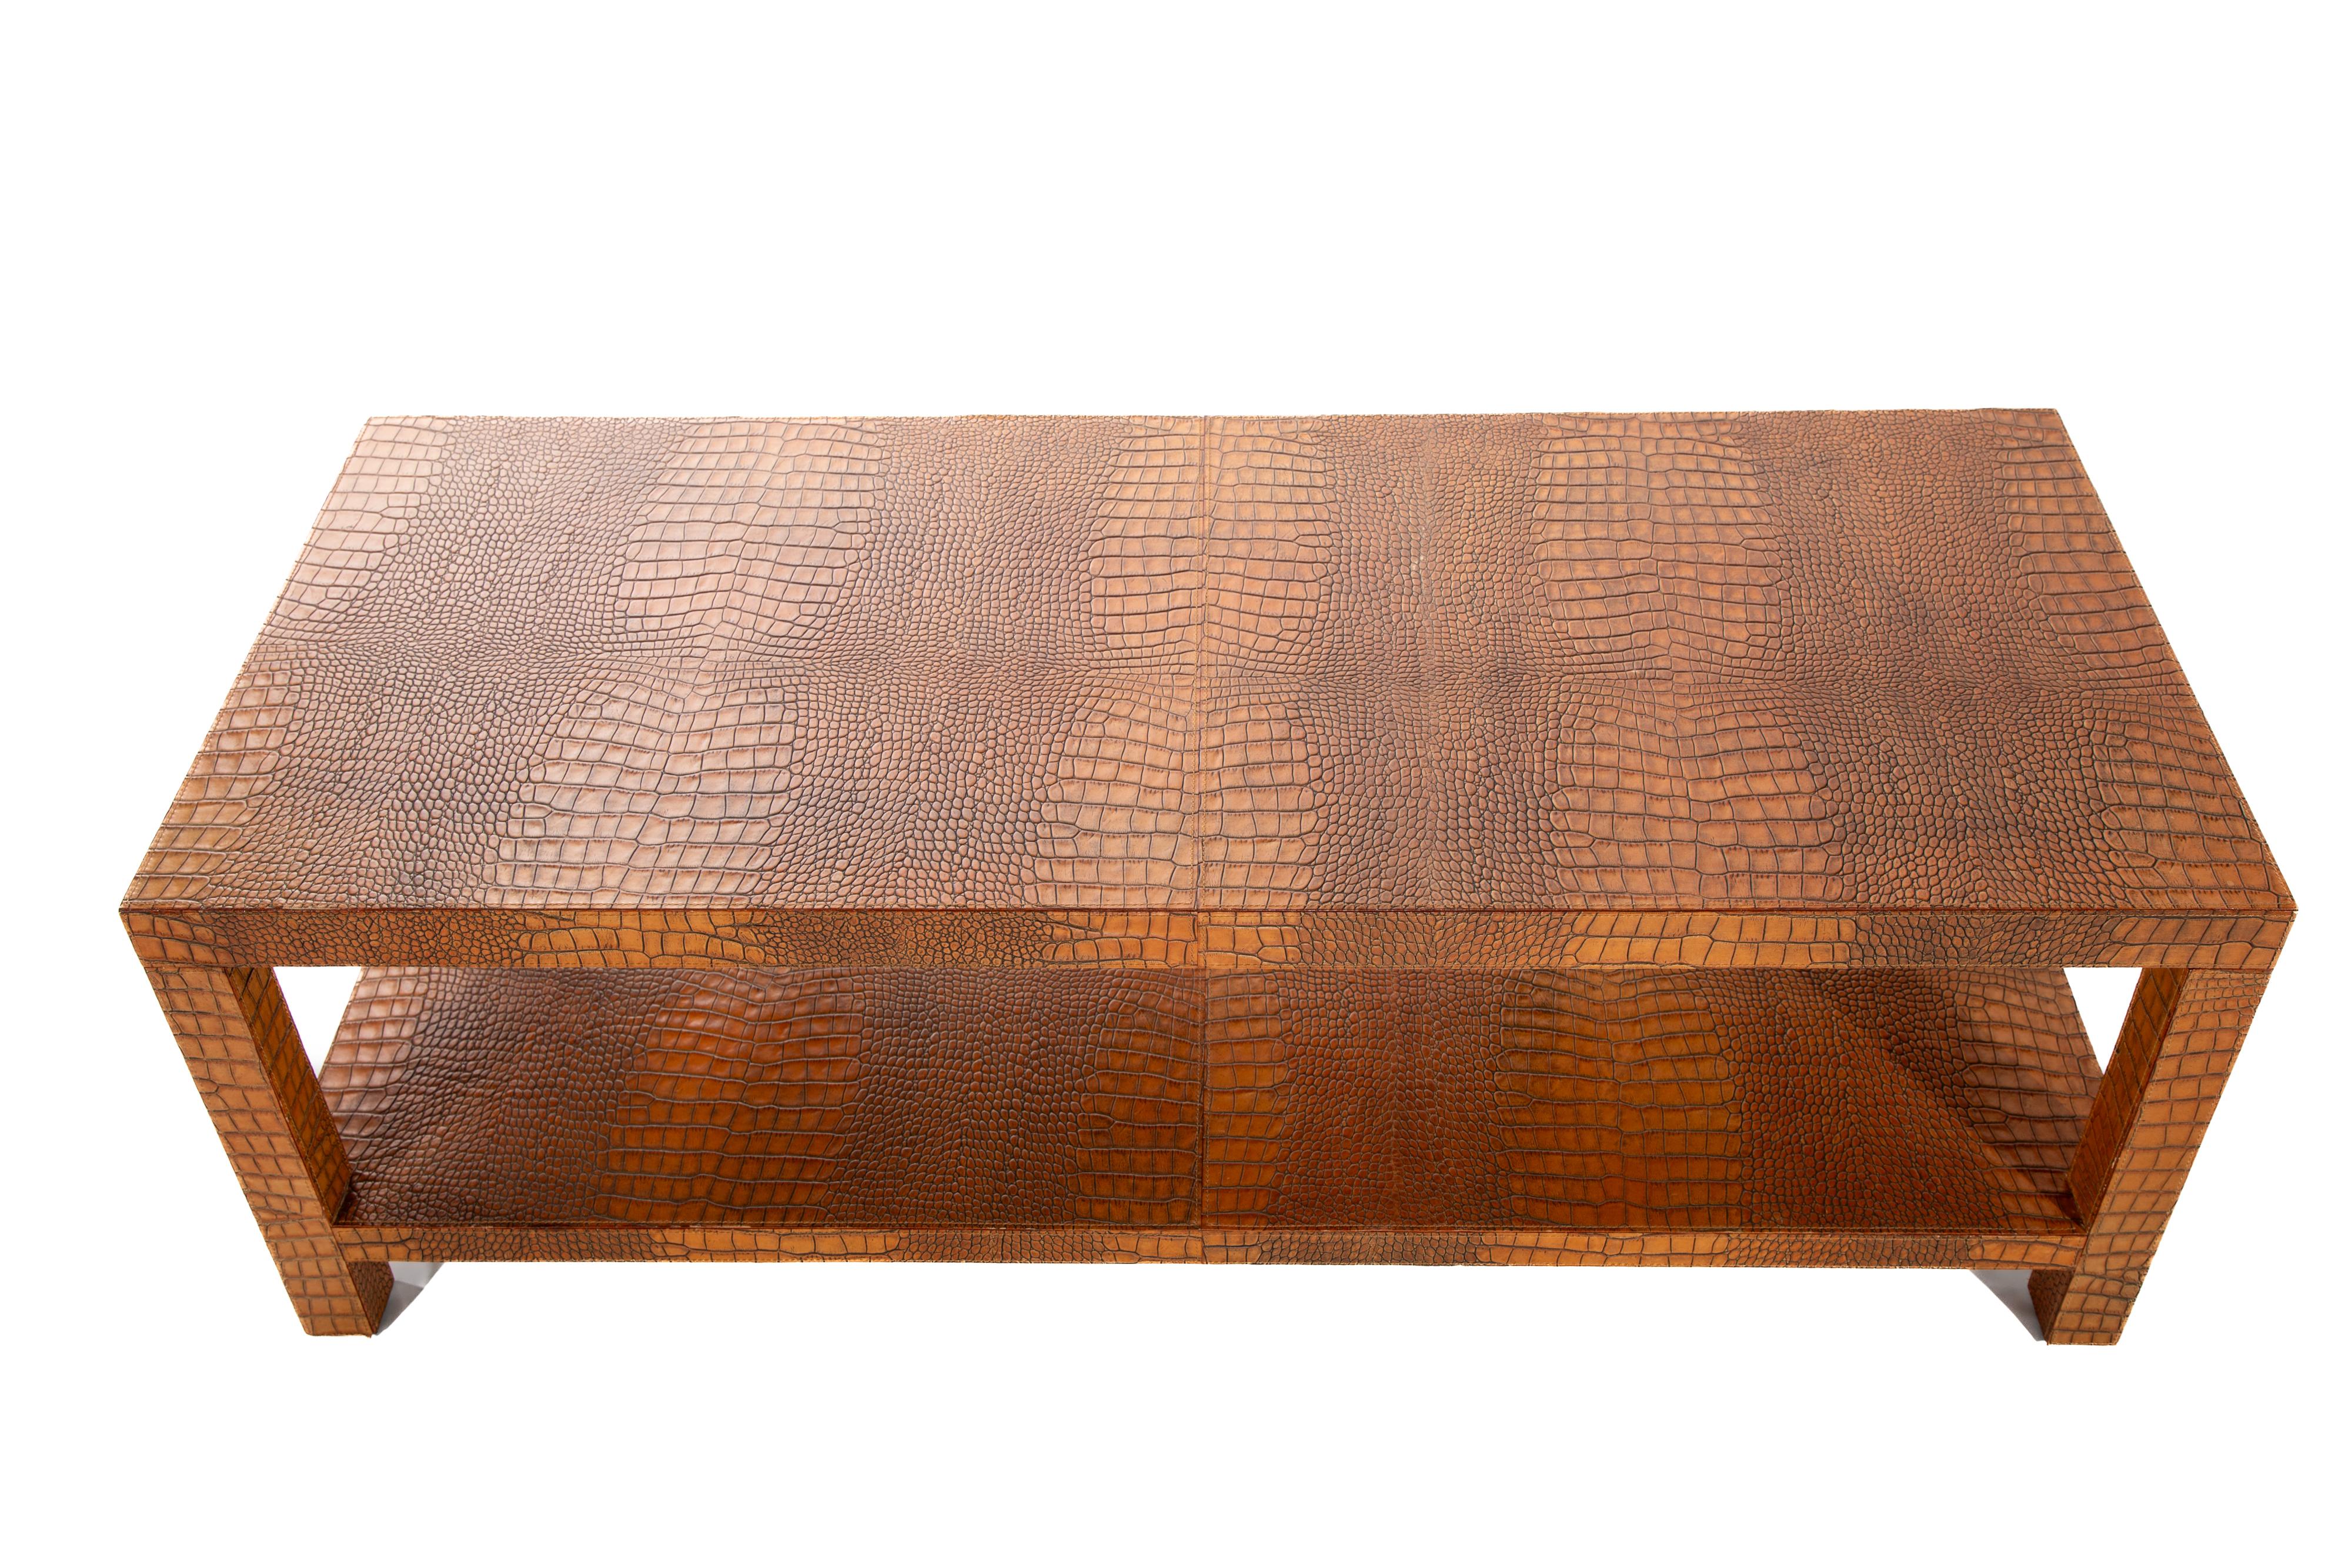 Chelsea coffee table from Mrs. MacDougall, covered in faux croc.  
Made in France, stamped on bottom 